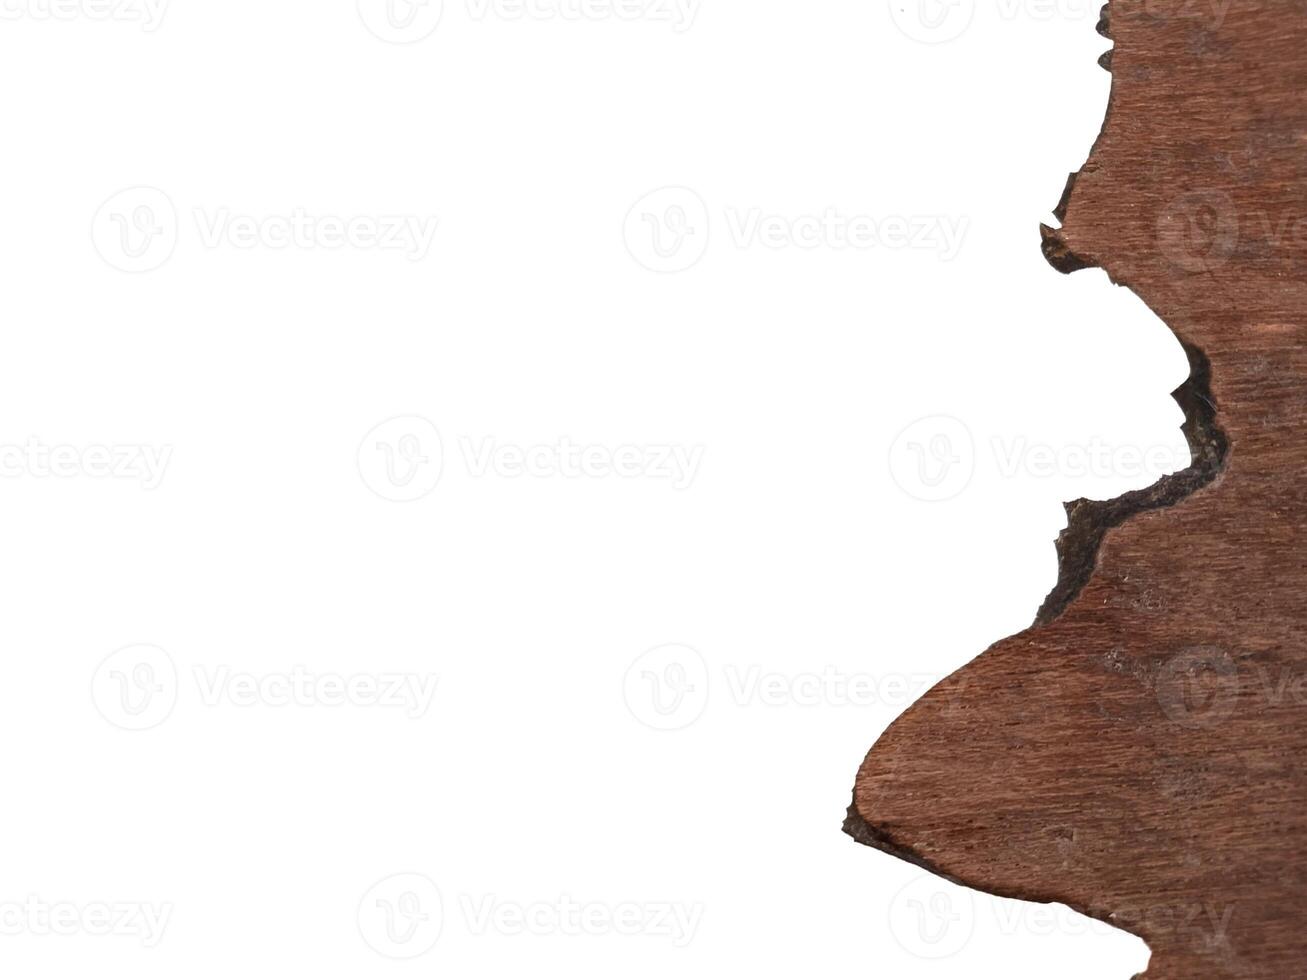 cracked wood grain on table white background photo